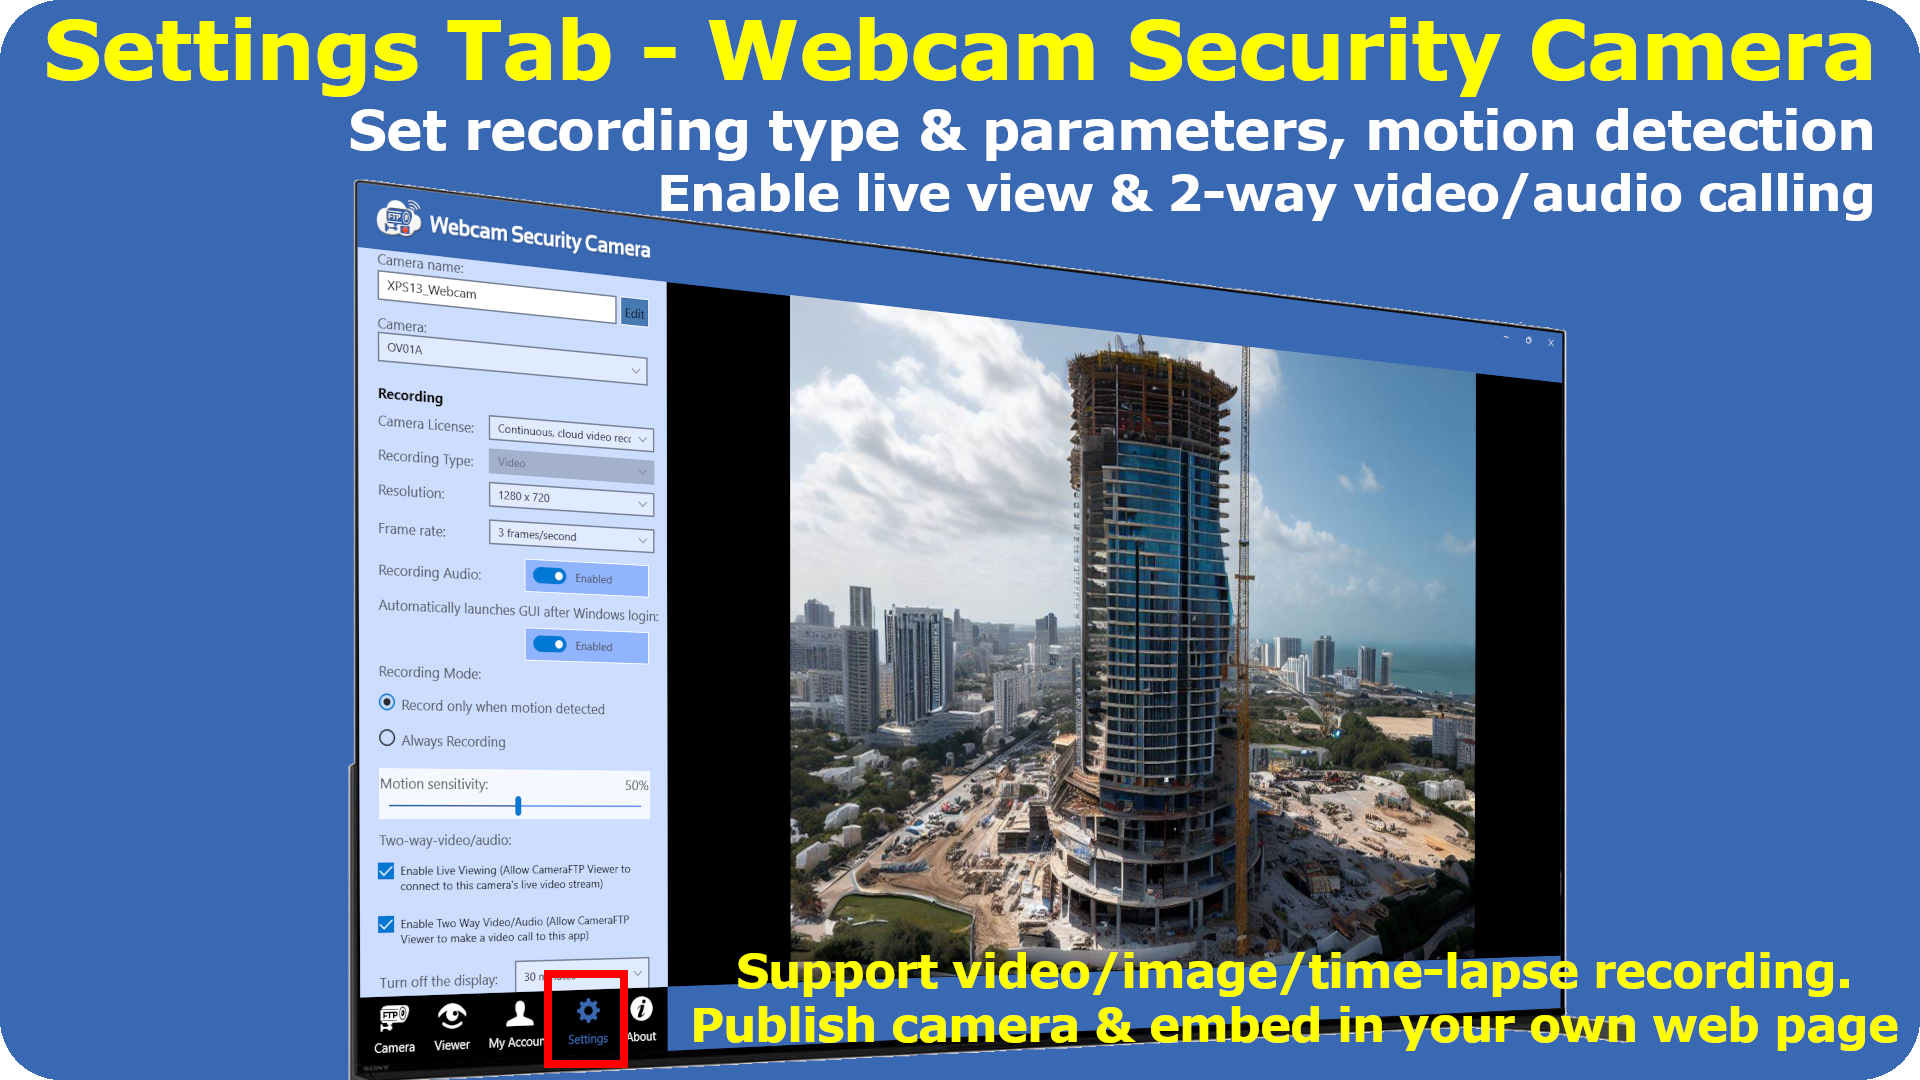 Webcam Security Camera Settings tab: set recording type, parameters, motion detection, enable live view / 2-way video call. Support video, image or time-lapse recording. Publish camera and embed in your own web page